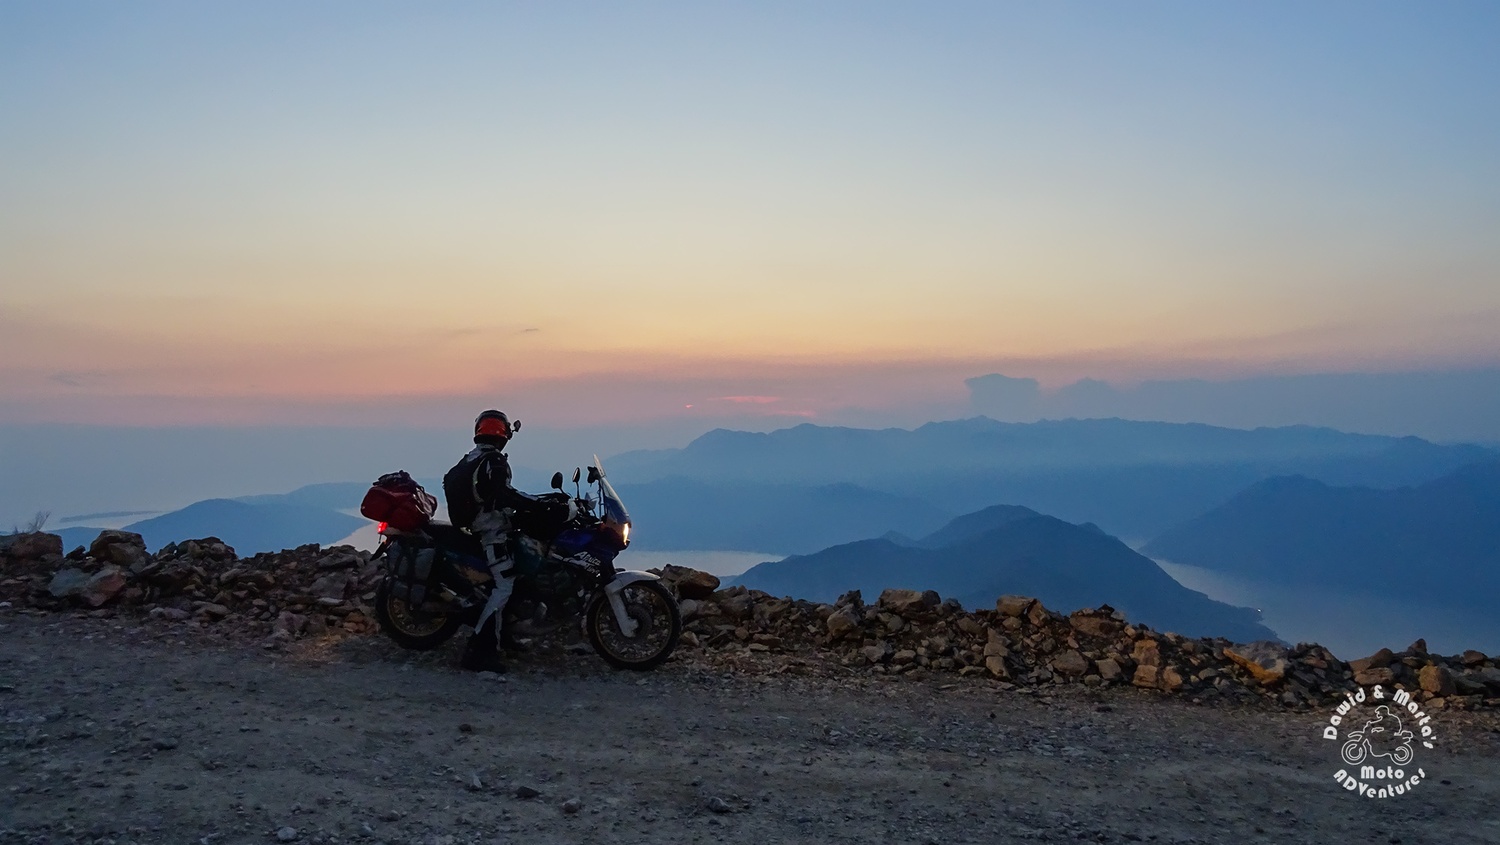 The Kotor Bay seen from the road to Lovcen National Park at the sunset and the Africa twin motorcycle